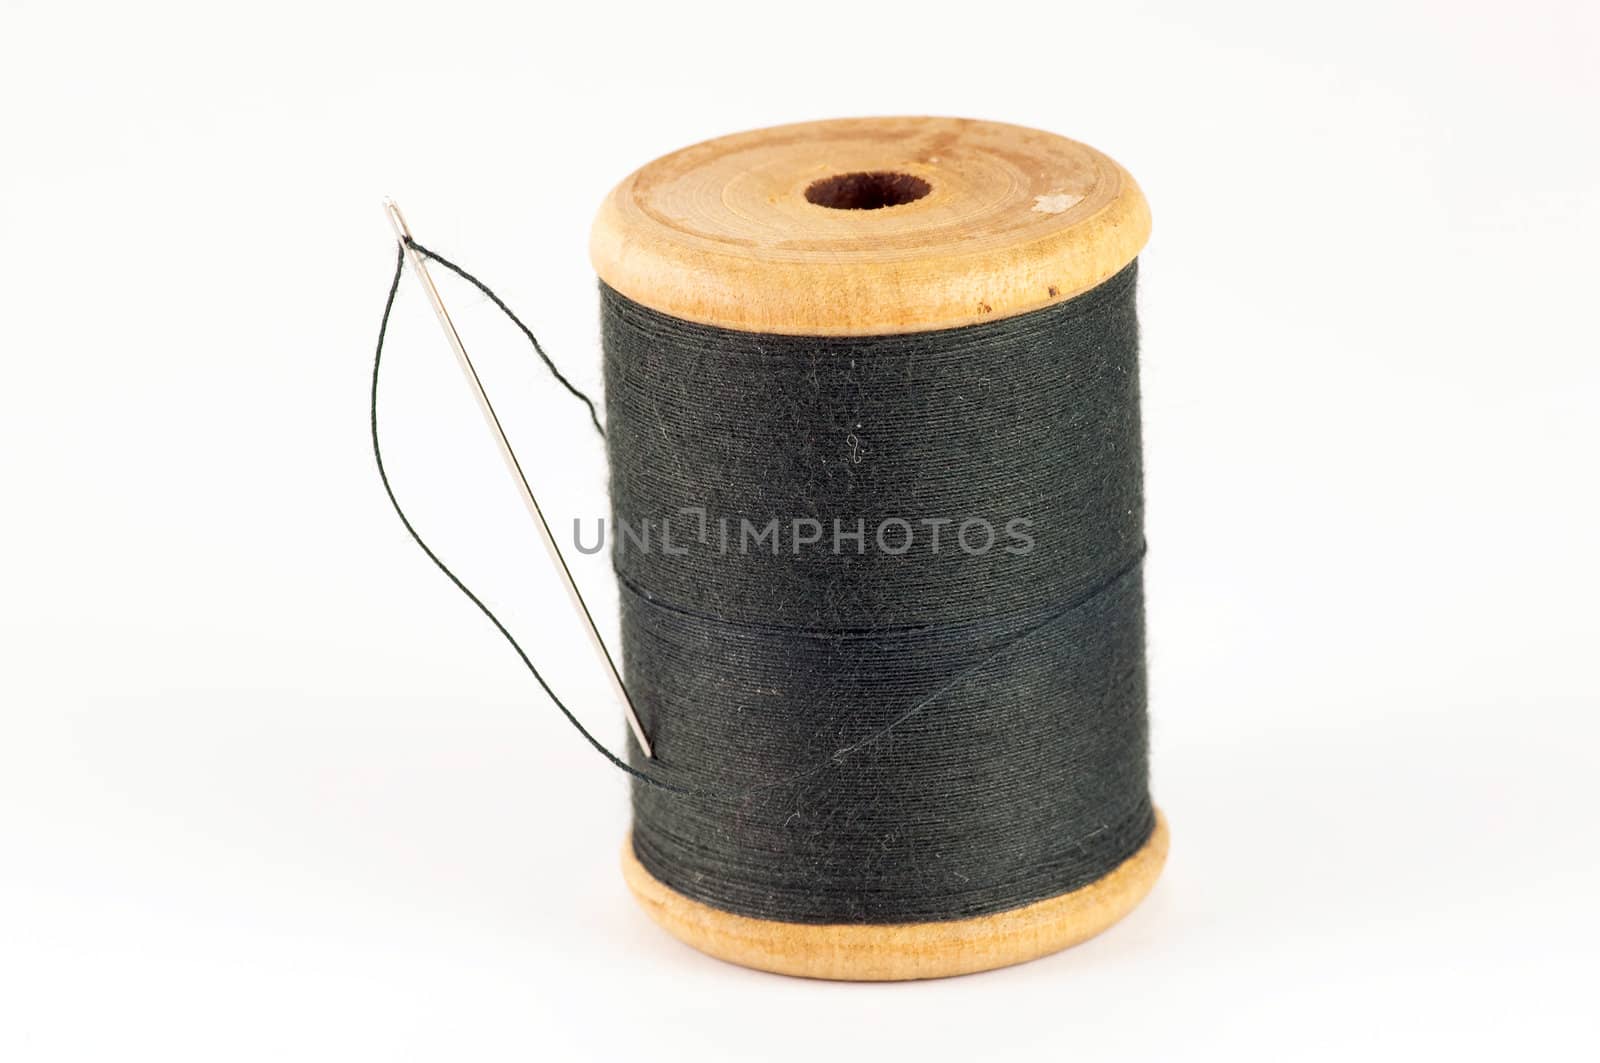 Spool of thread with needle  on white background